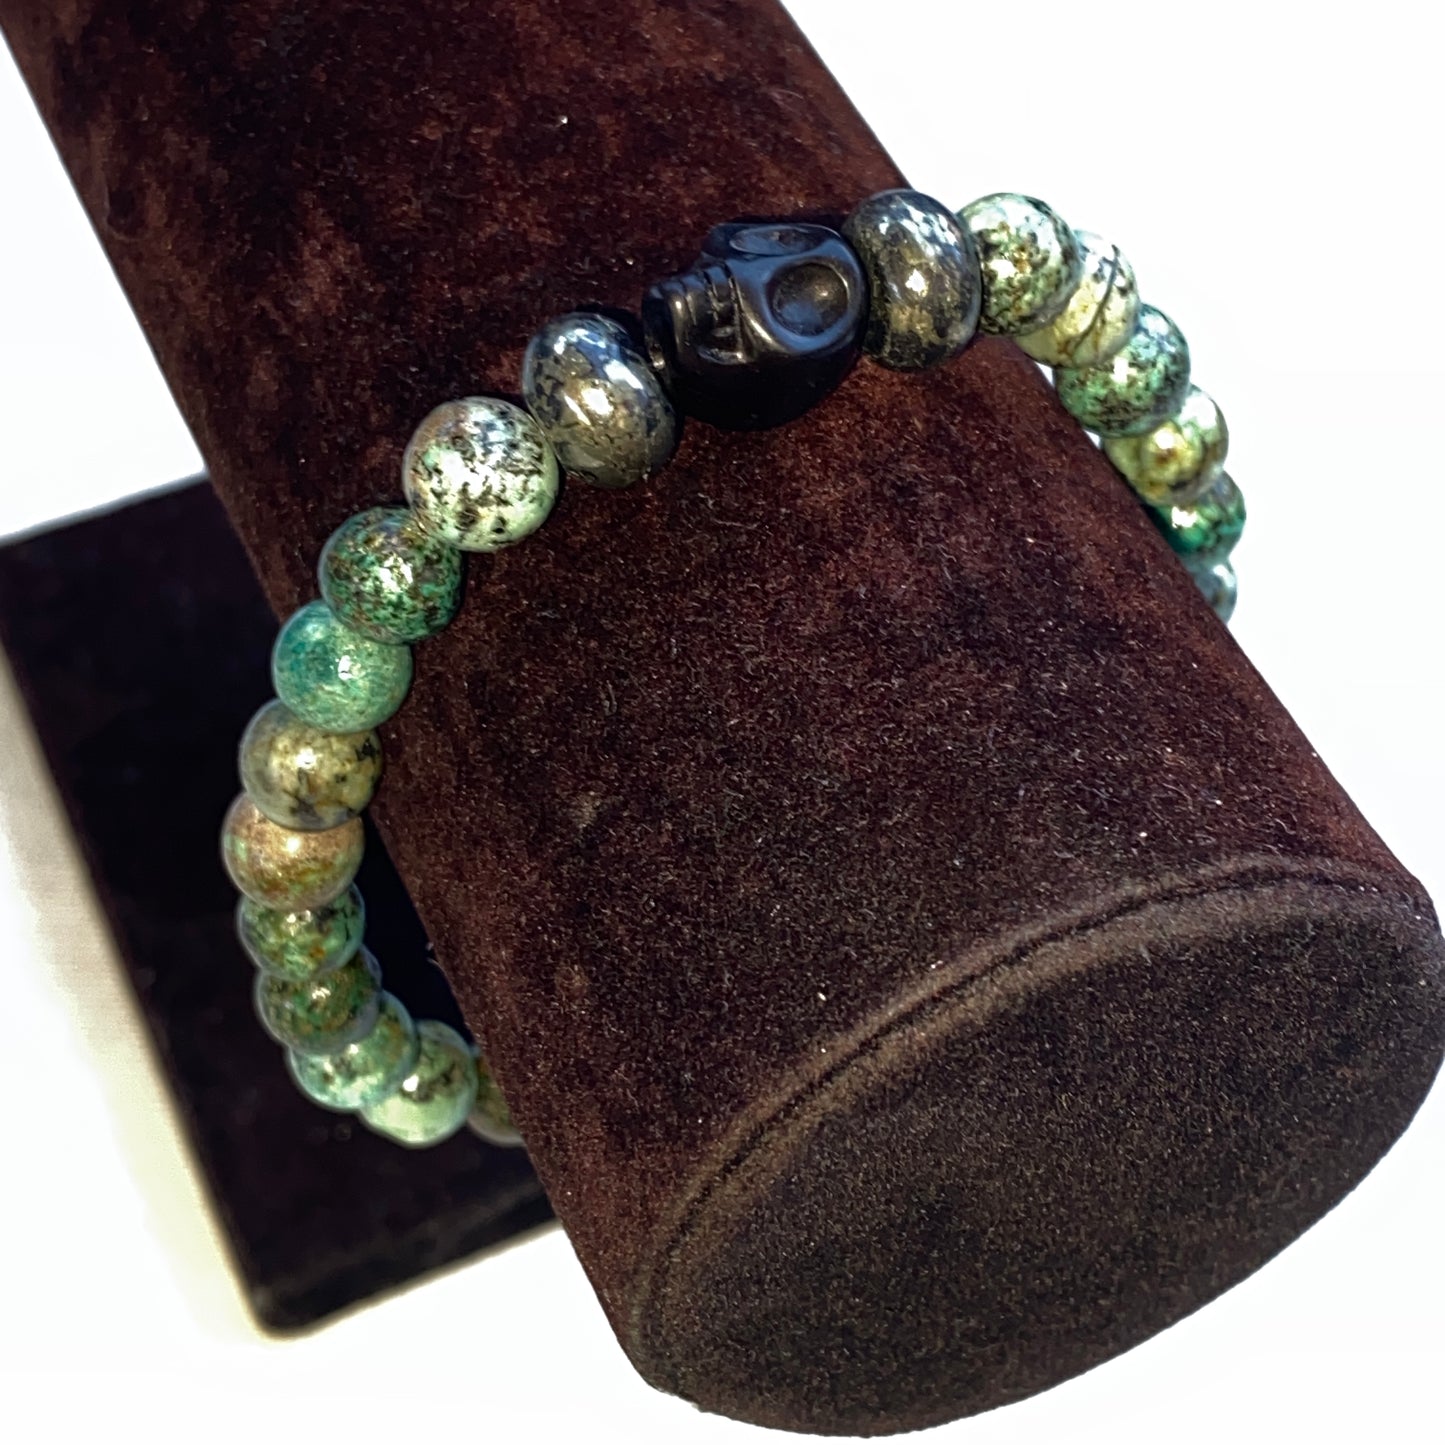 African Turquoise, Pyrite, and Howlite Skull Men’s Stretch Bracelet